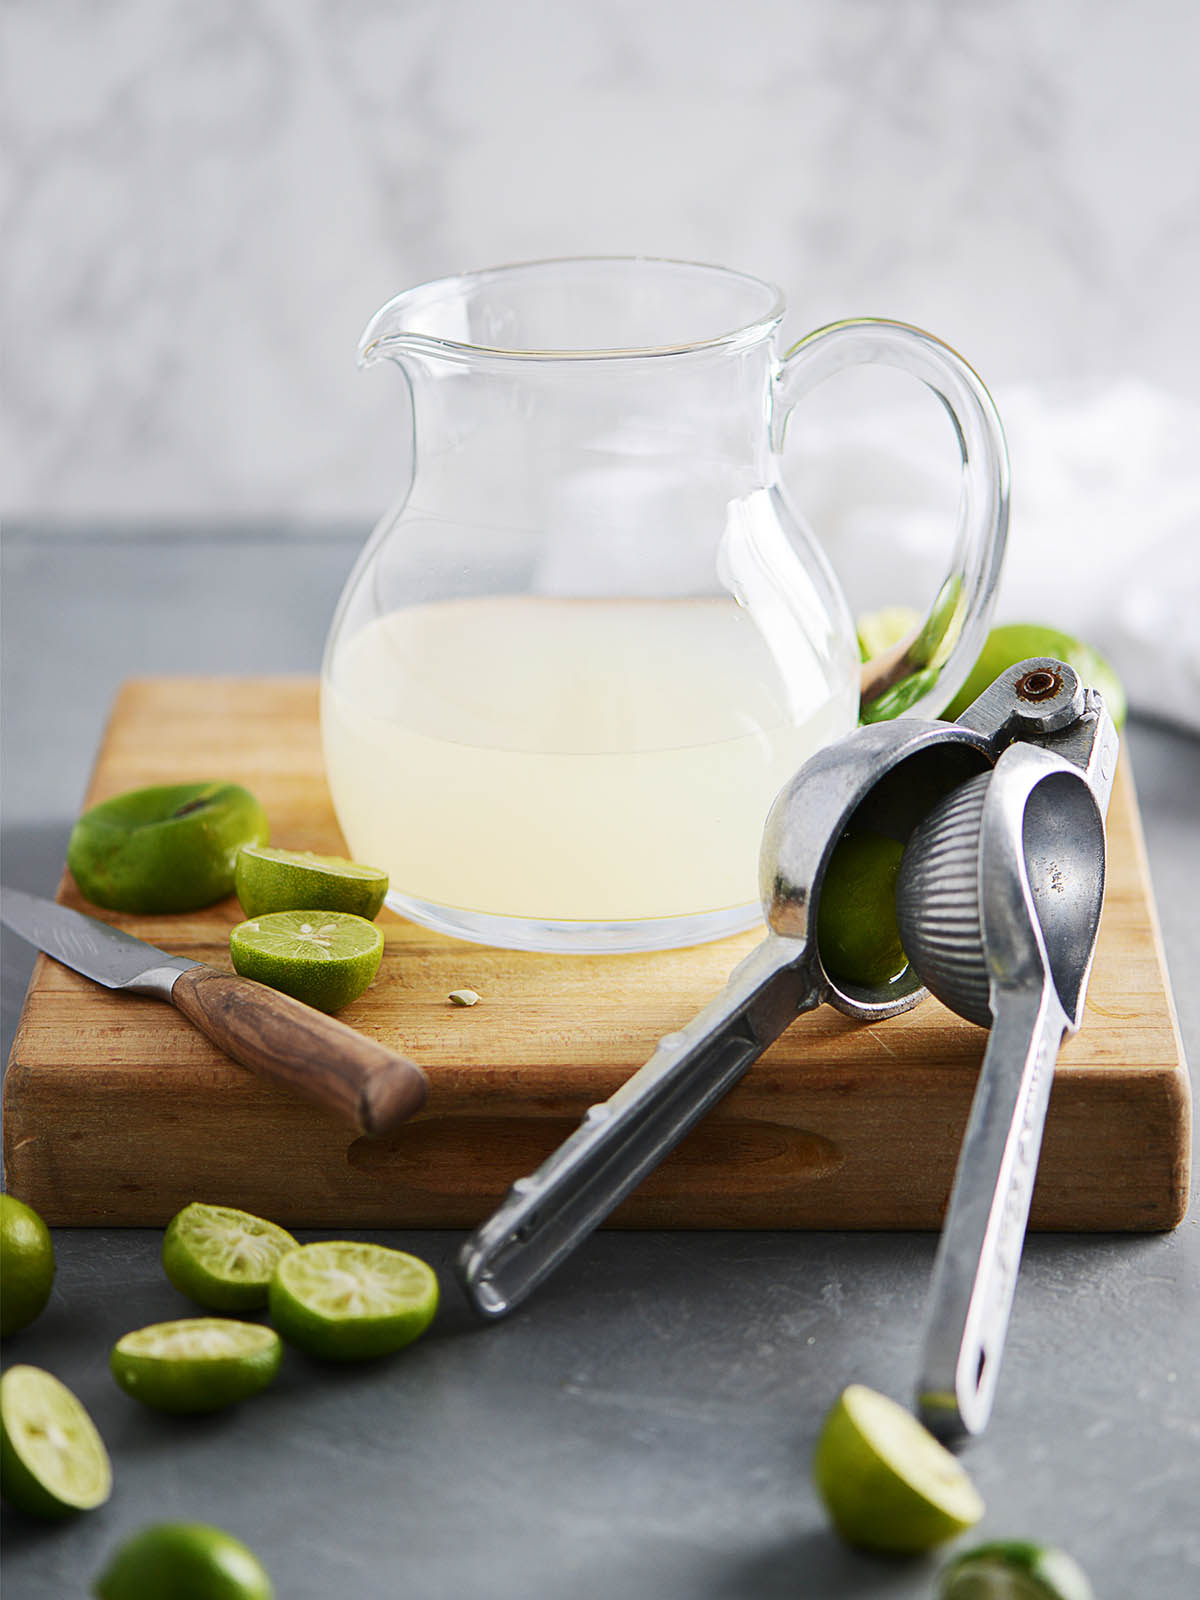 A glass jar half filled with lime juice and squeezed limes on the side.